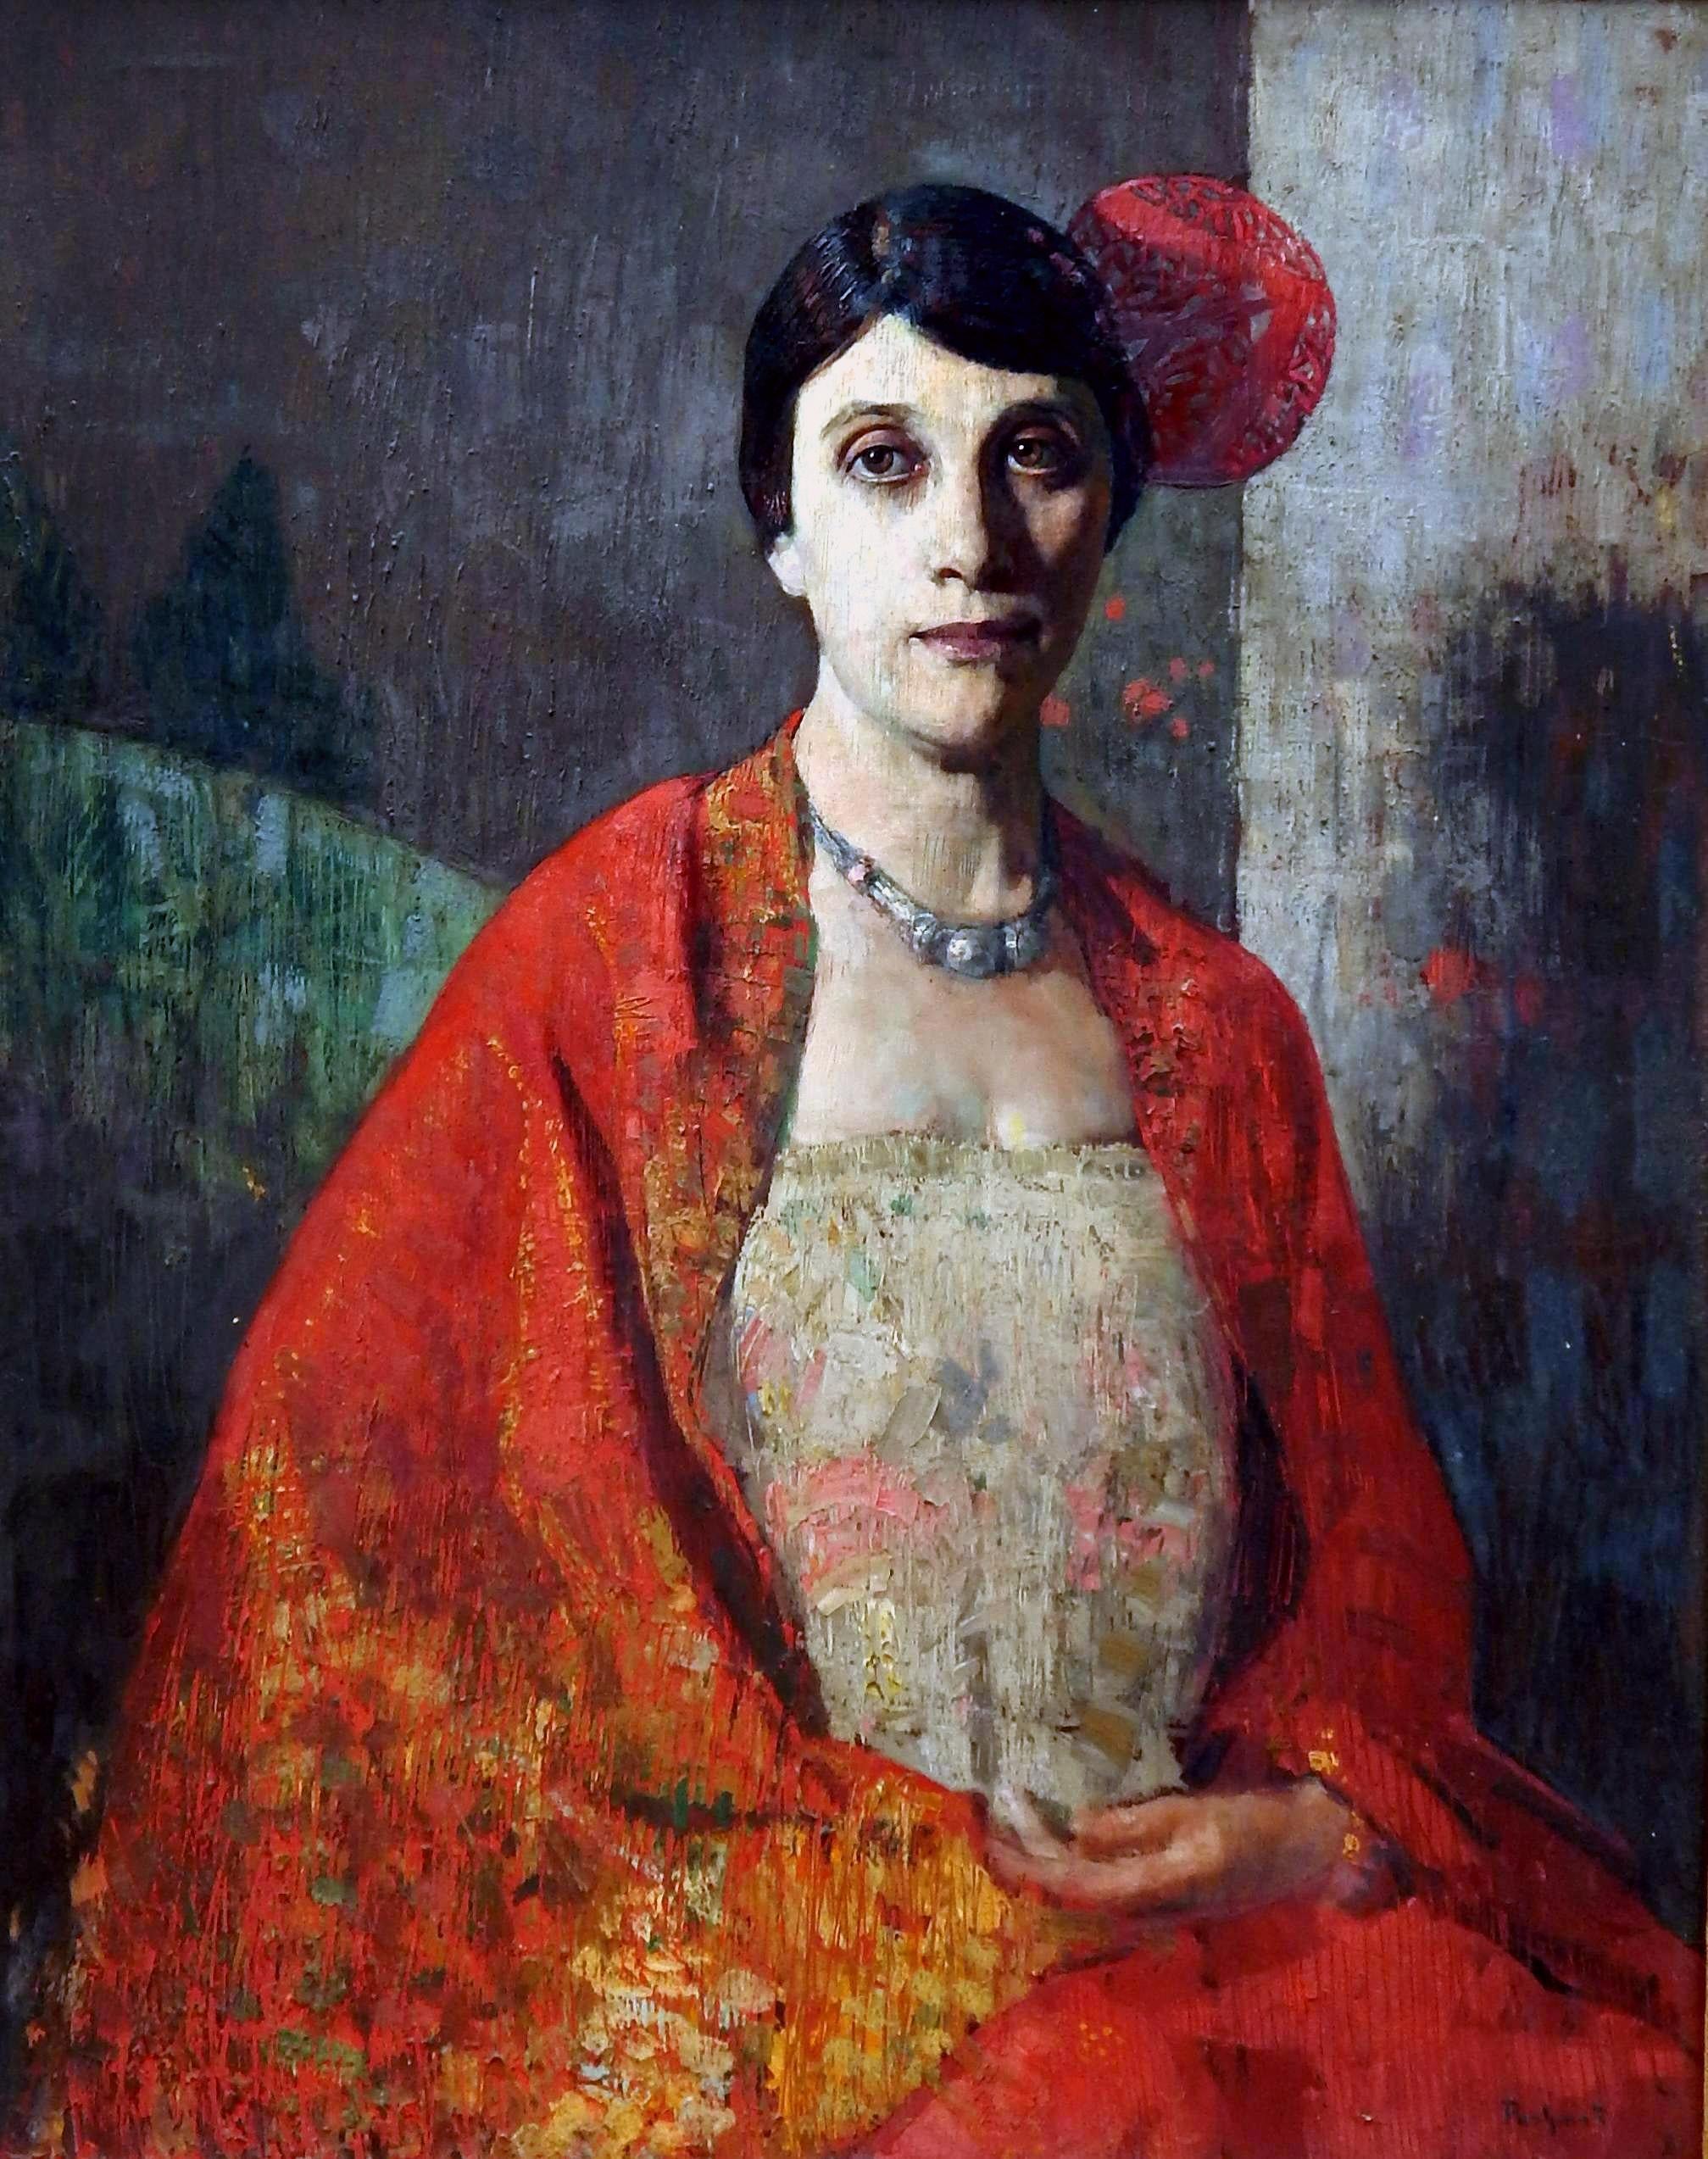 Beautiful and detailed original oil on canvas by Armenian/American artist Hovsep Pushman.
The sitter is Mary Bernard whose father was Jean (Juan) Bernard and whose mother was
Susan Machado. The sitter’s husband was John Frank Burkhard.
The work was